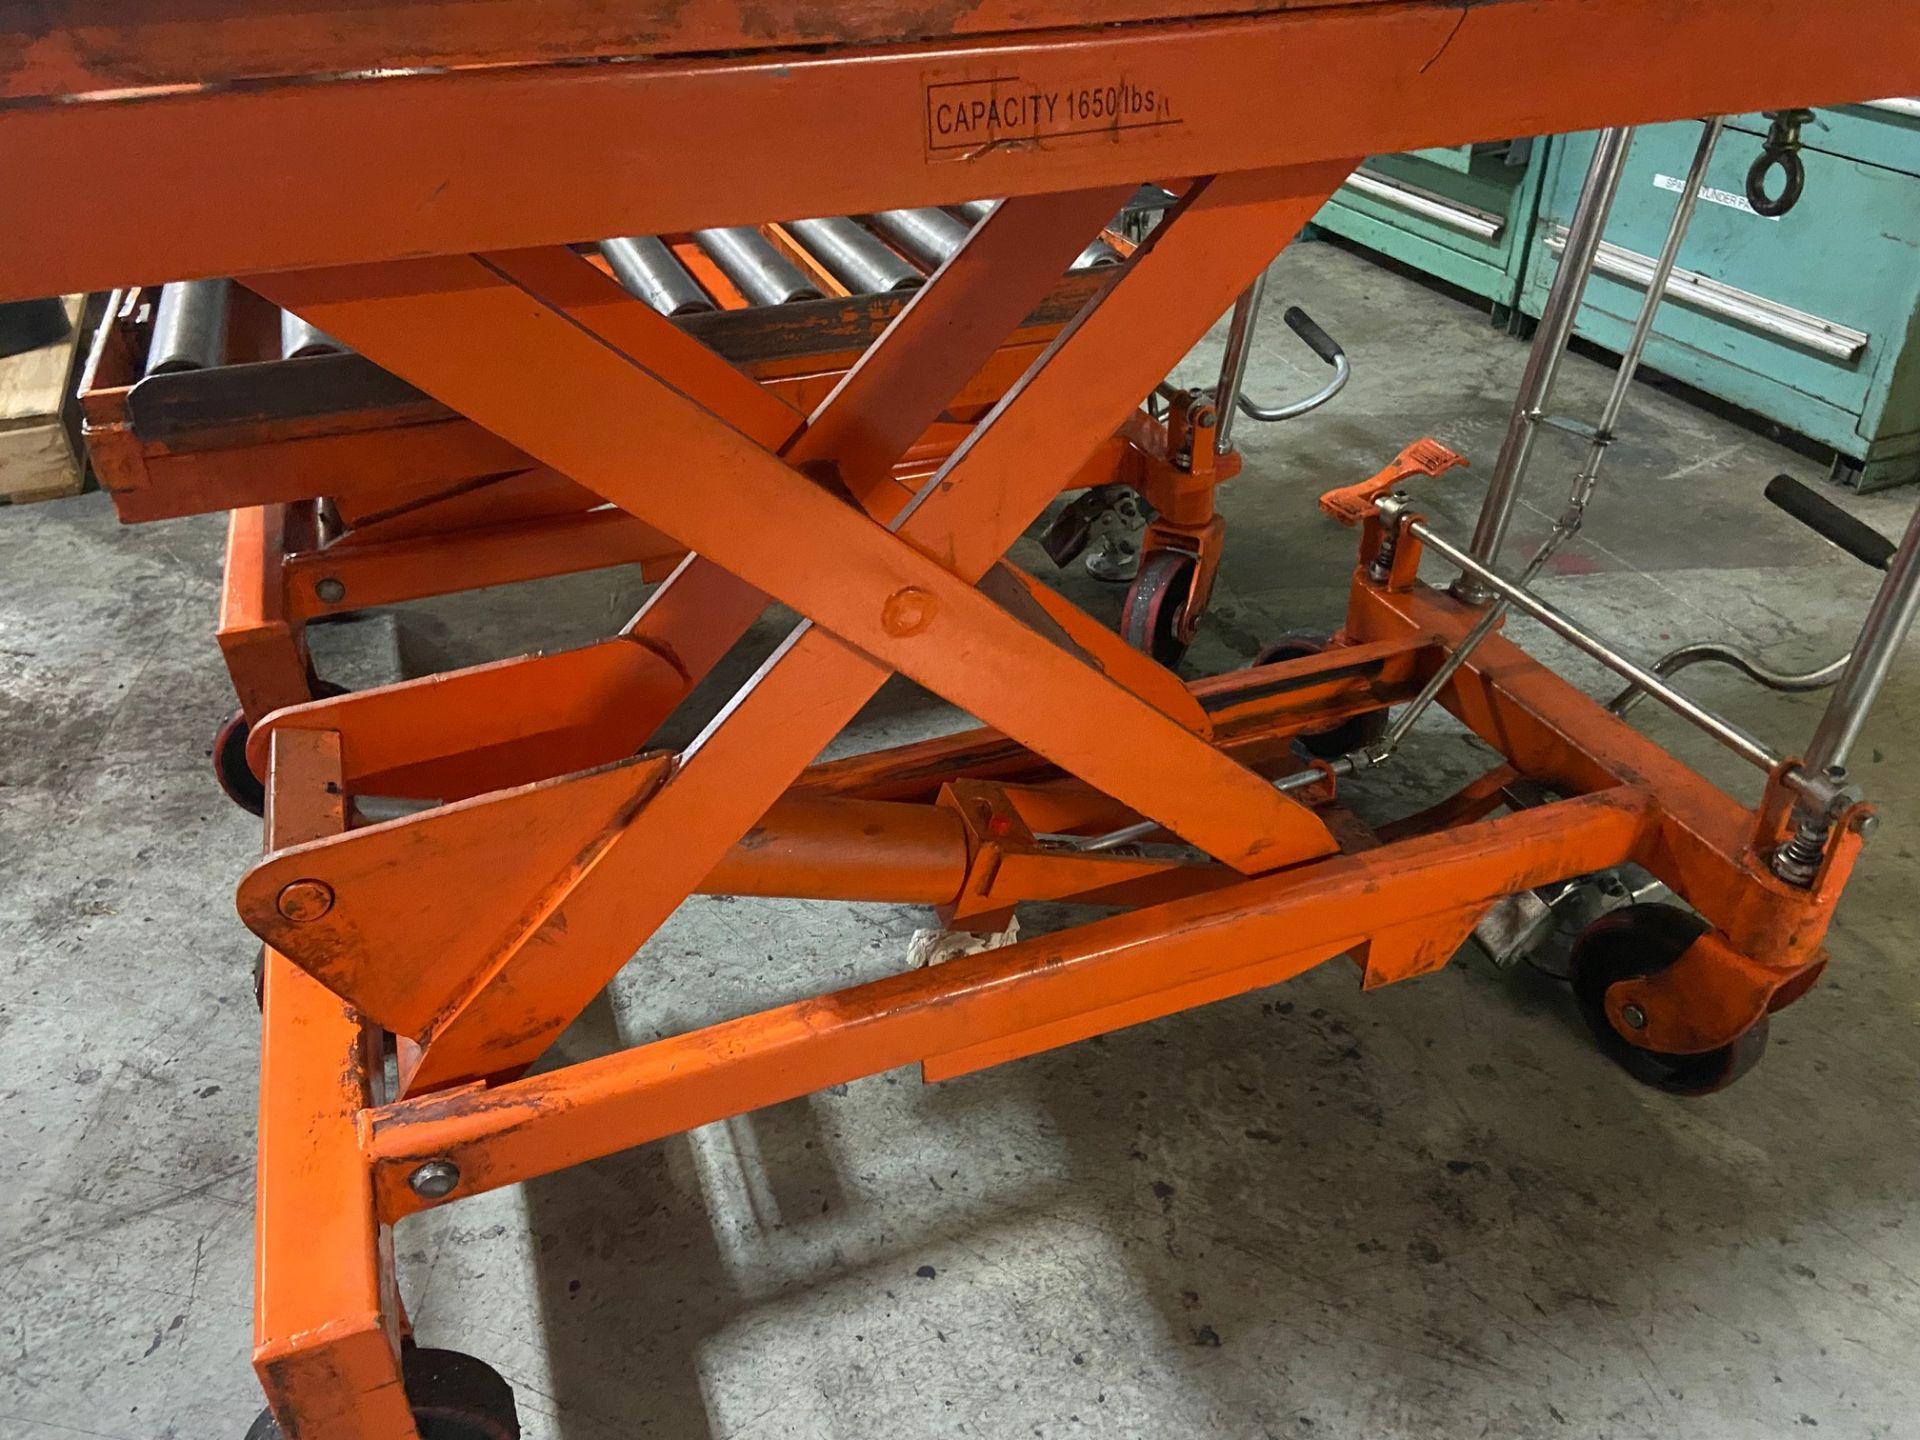 PORTABLE DIE LIFT TABLE ON CASTORS, 1650 LBS, C/W 19" X 39" ROLL TOP CONVEYOR & CABLE WINCH - Image 2 of 4